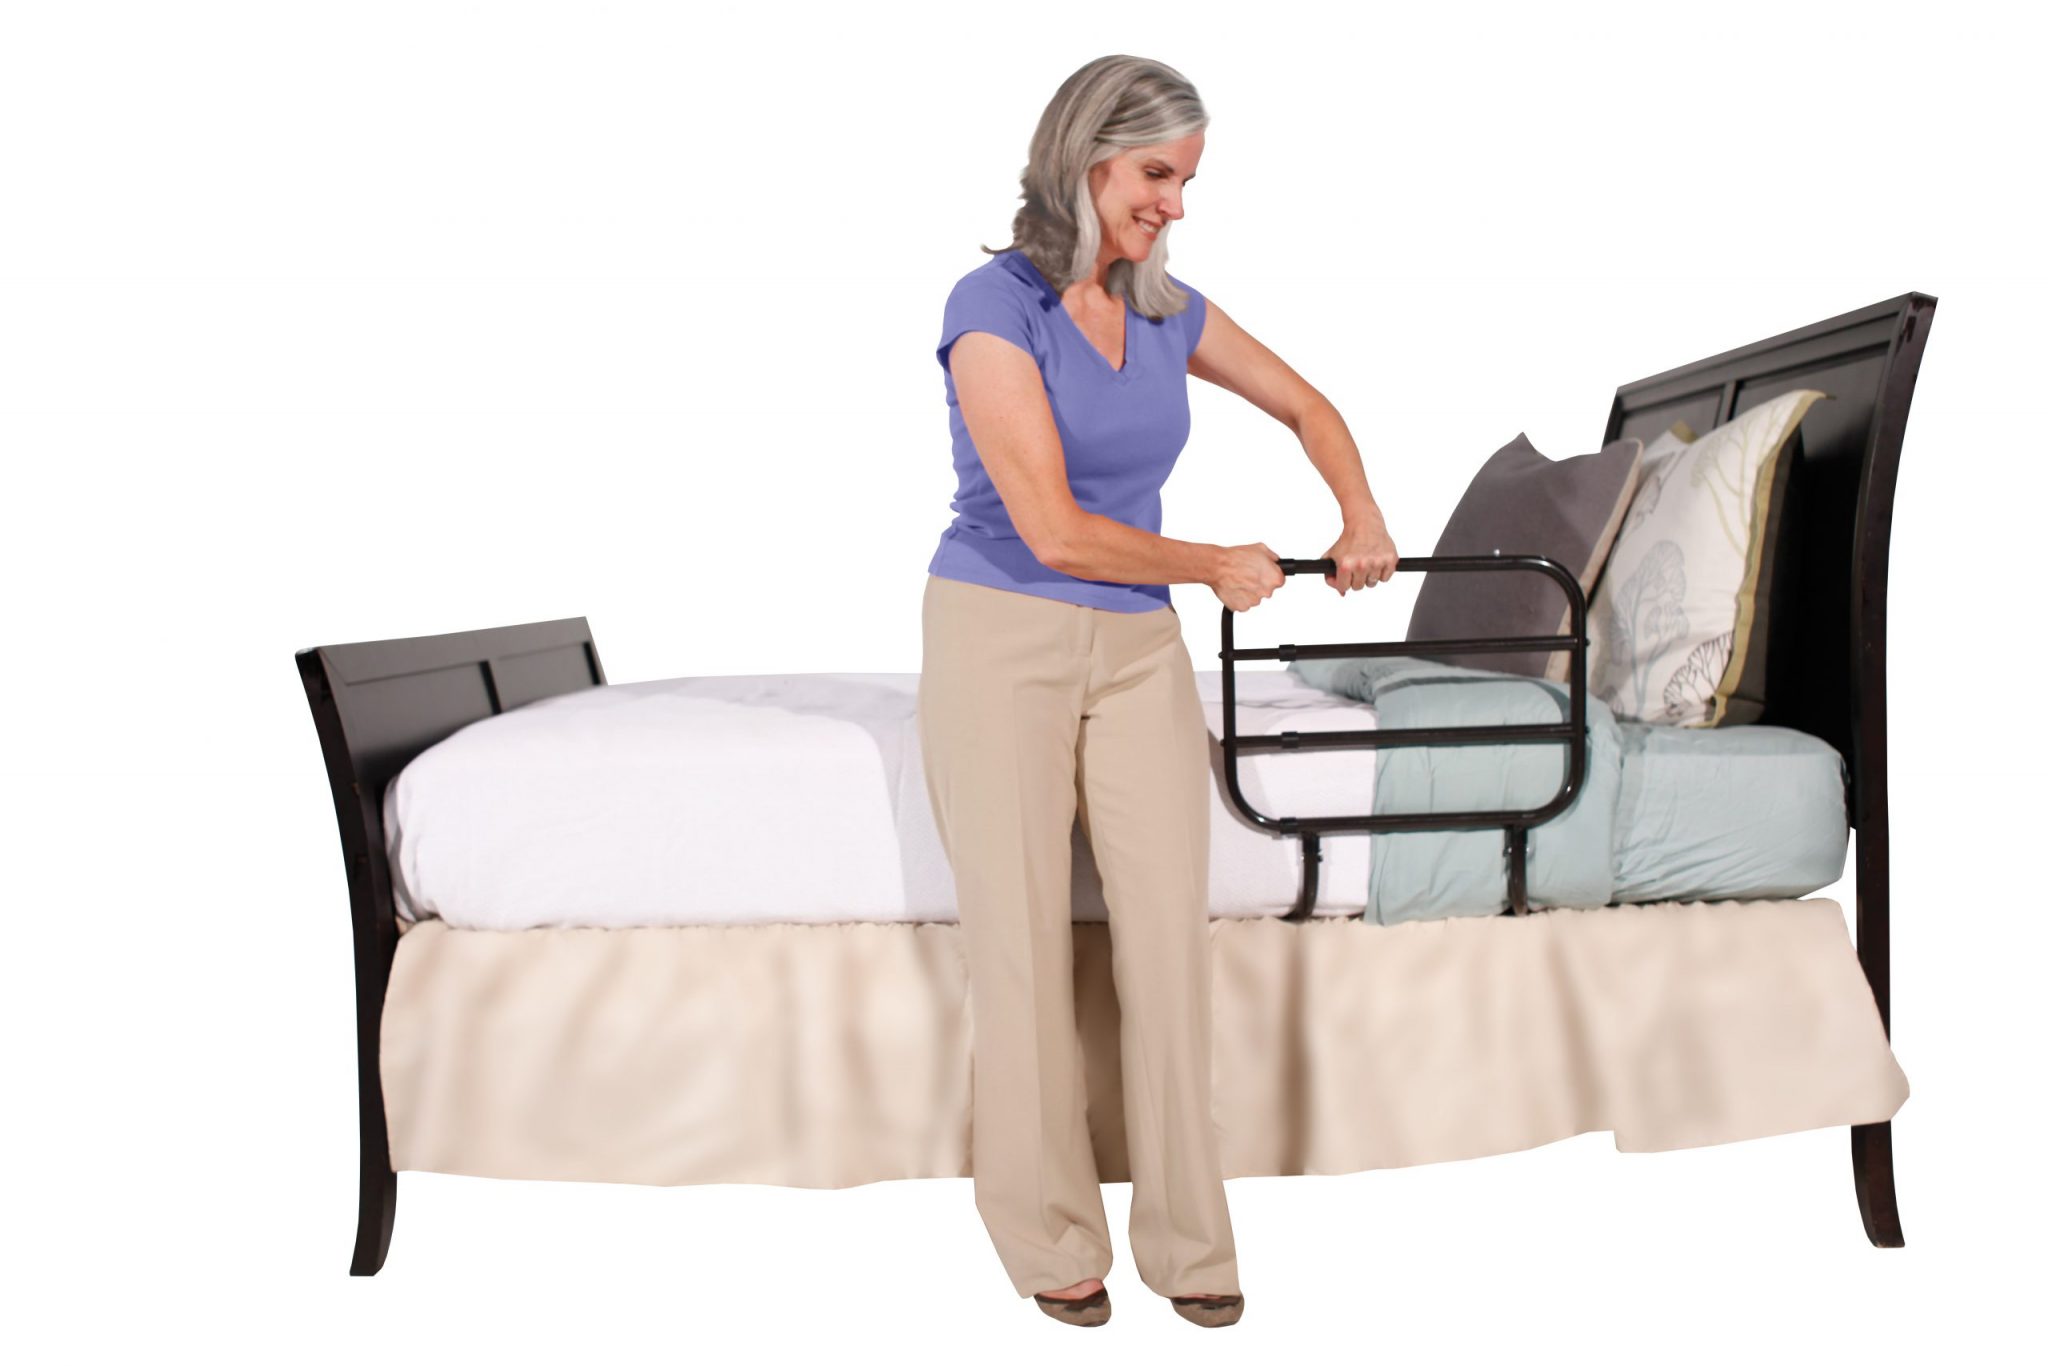 bed safety rails amazon